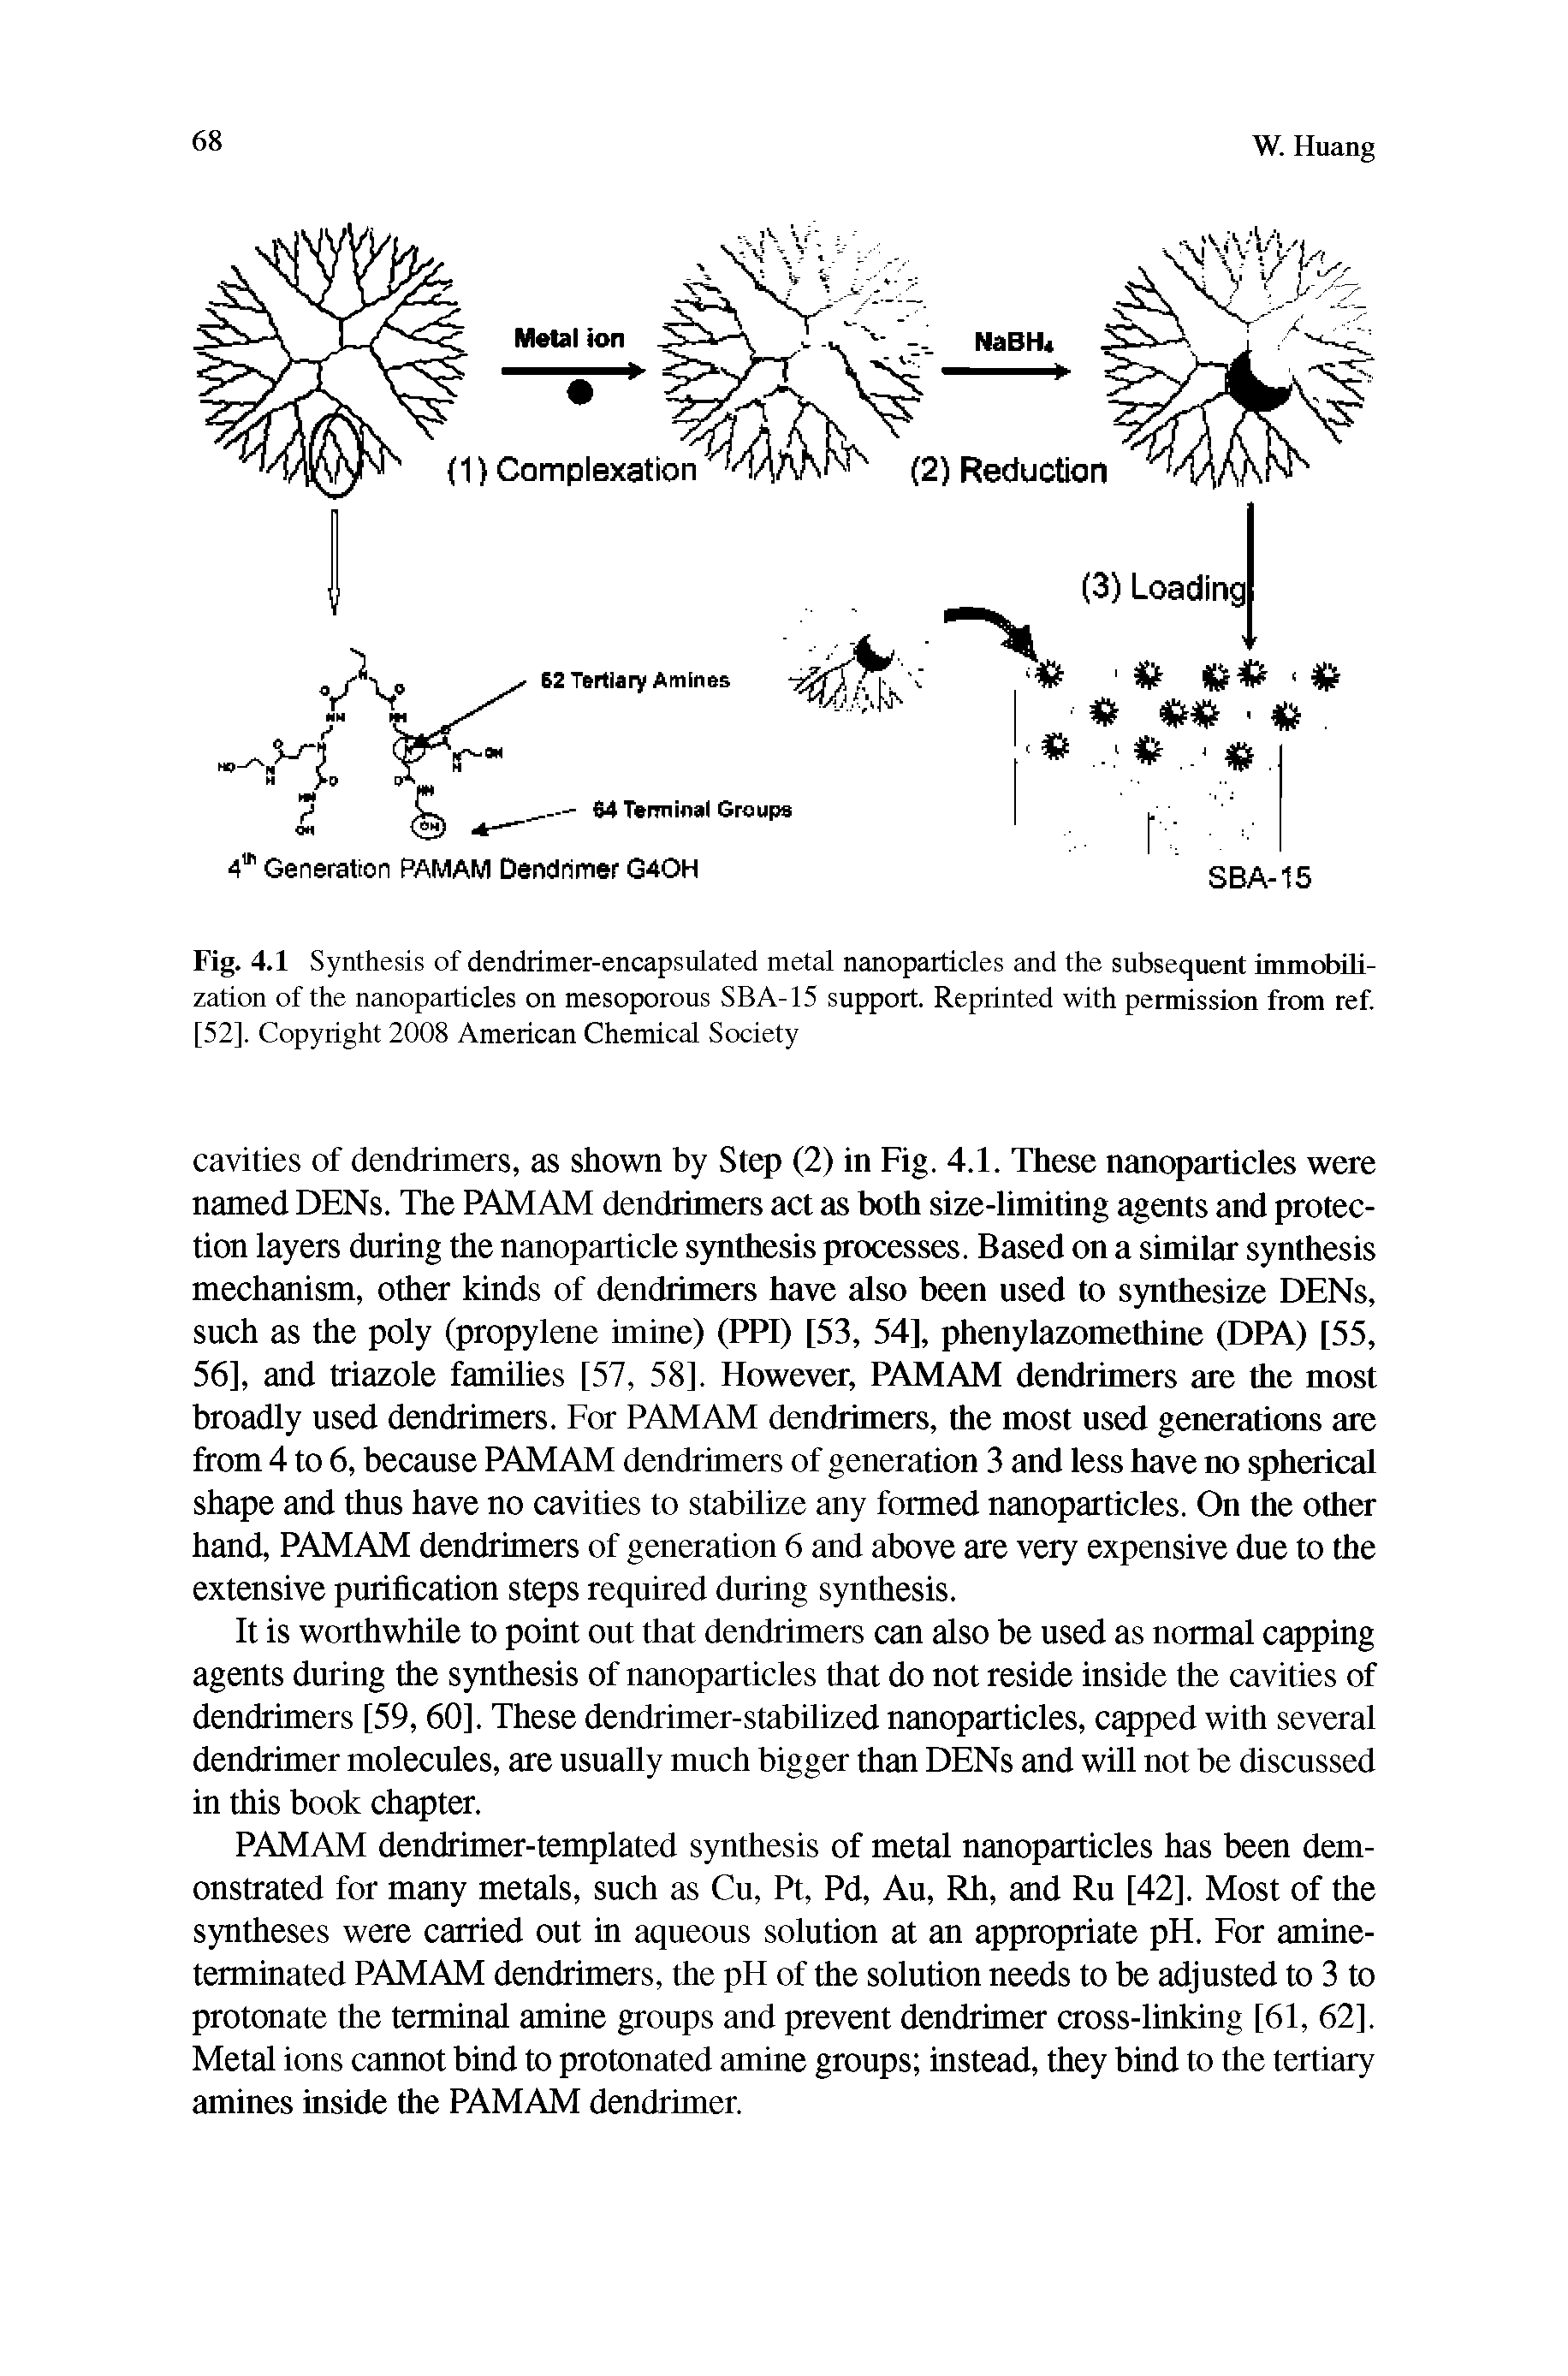 Fig. 4.1 Synthesis of dendrimer-encapsulated metal nanoparticles and the subsequent immobilization of the nanoparticles on mesoporous SBA-15 support. Reprinted with permission from ref. [52], Copyright 2008 American Chemical Society...